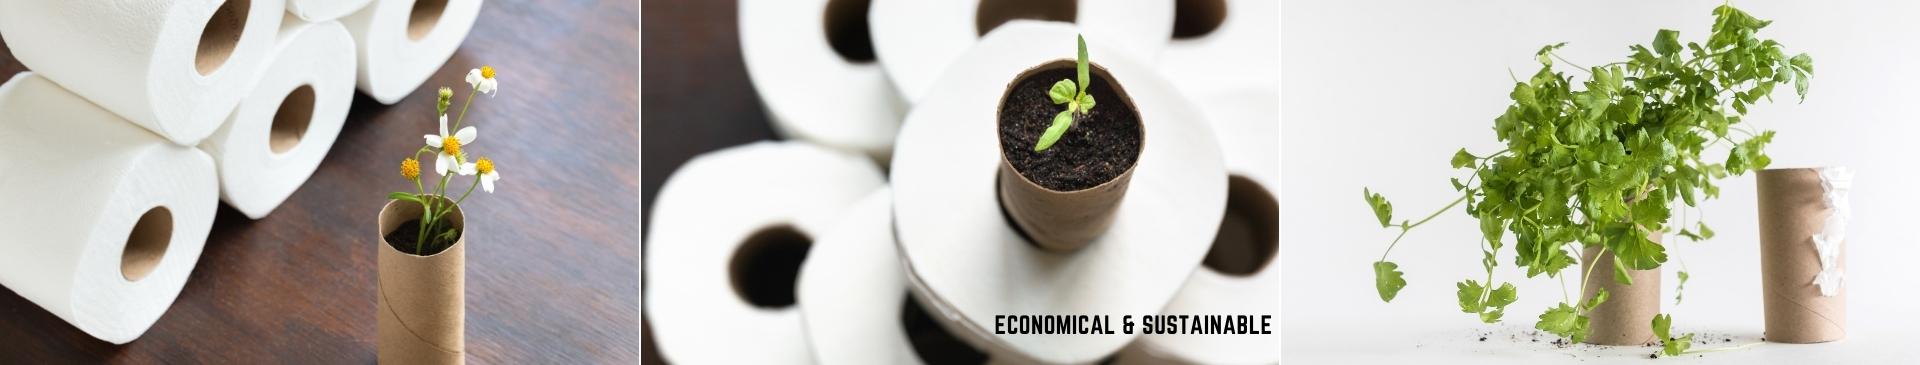 Starting Seeds in Empty Toilet Rolls: Economical, Sustainable, and Great for Your Seedlings